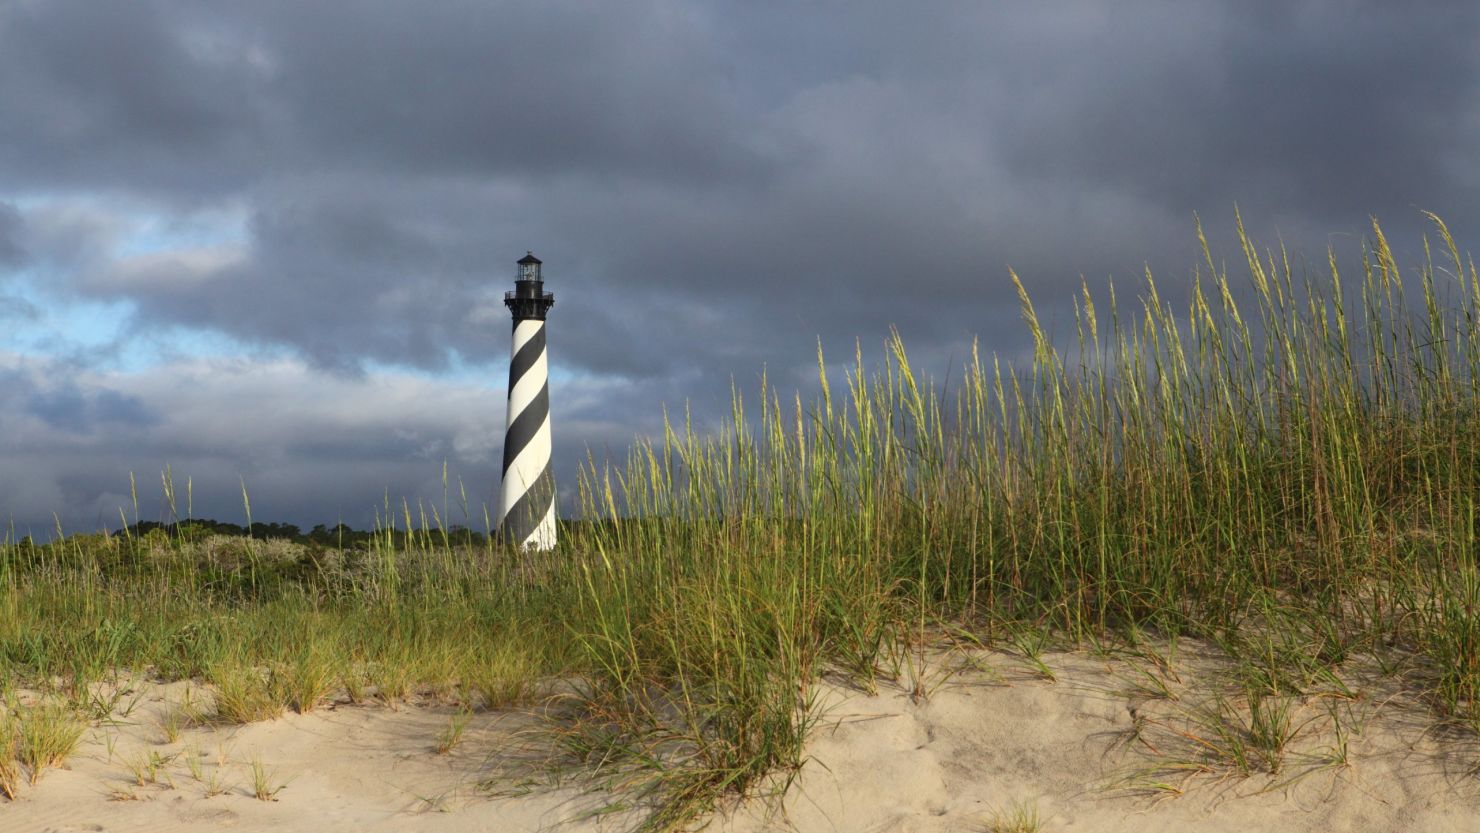 The Cape Hatteras Lighthouse in Buxton is an iconic North Carolina landmark. Climb to the top for sweeping ocean views.